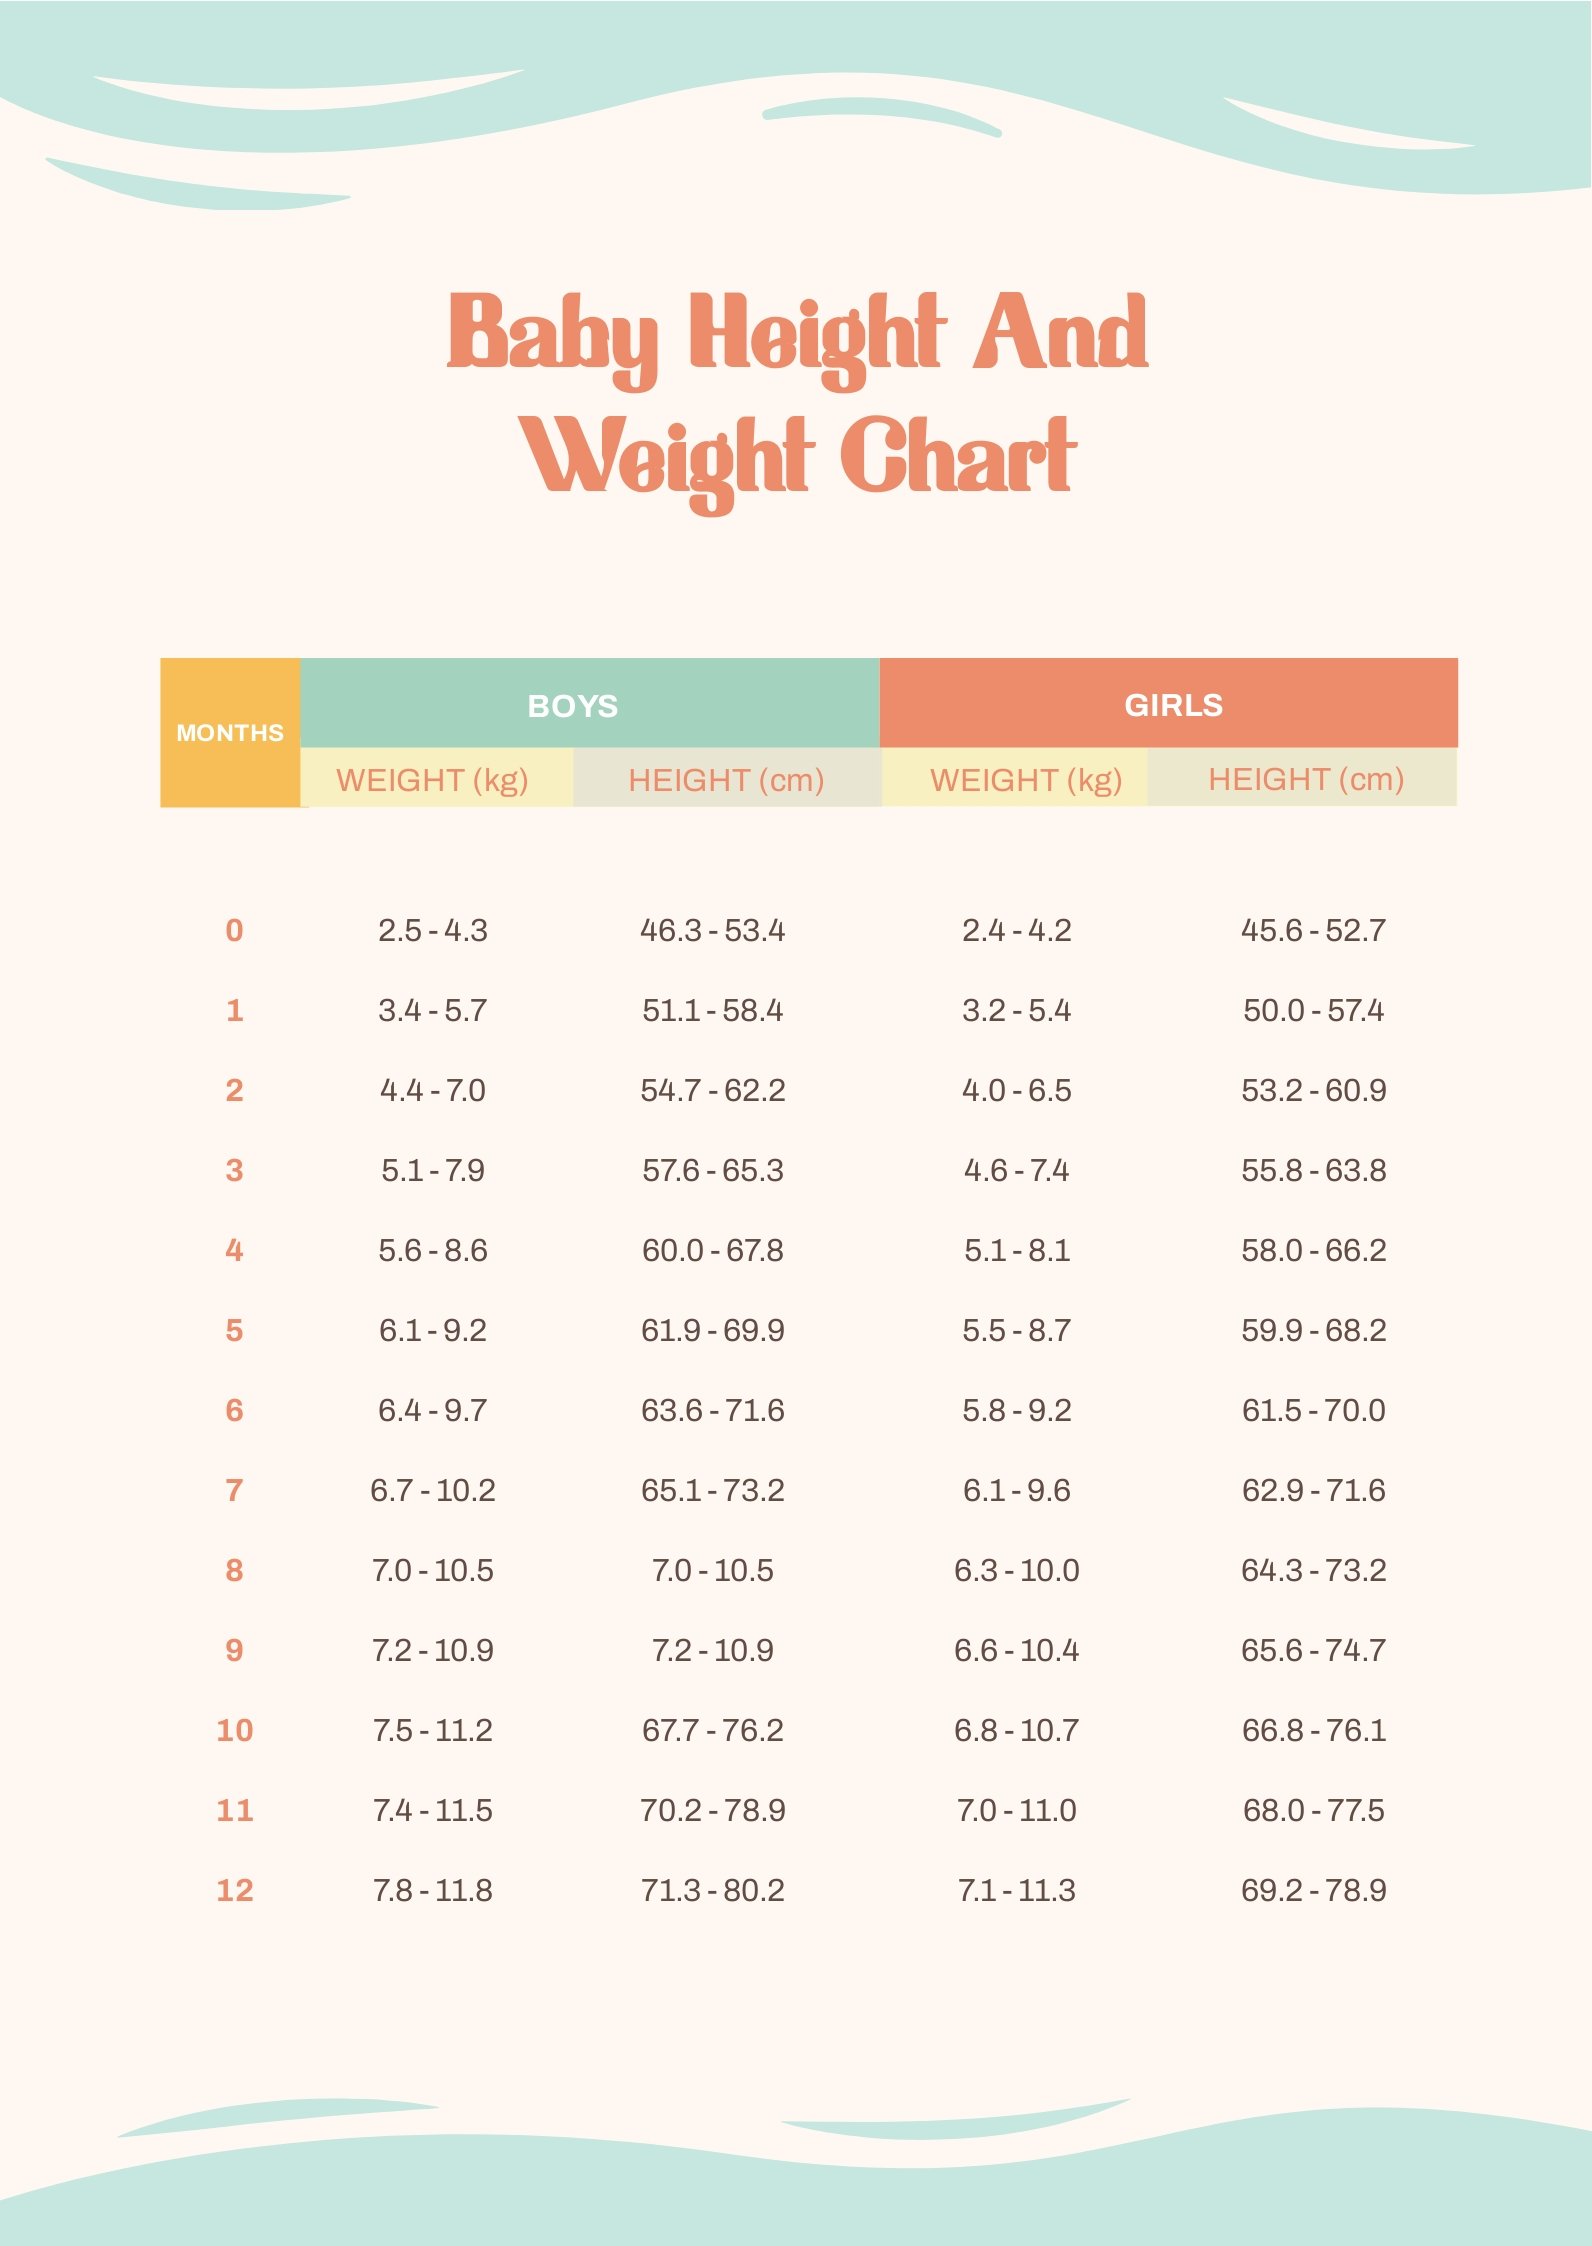 Baby Height and Weight Chart